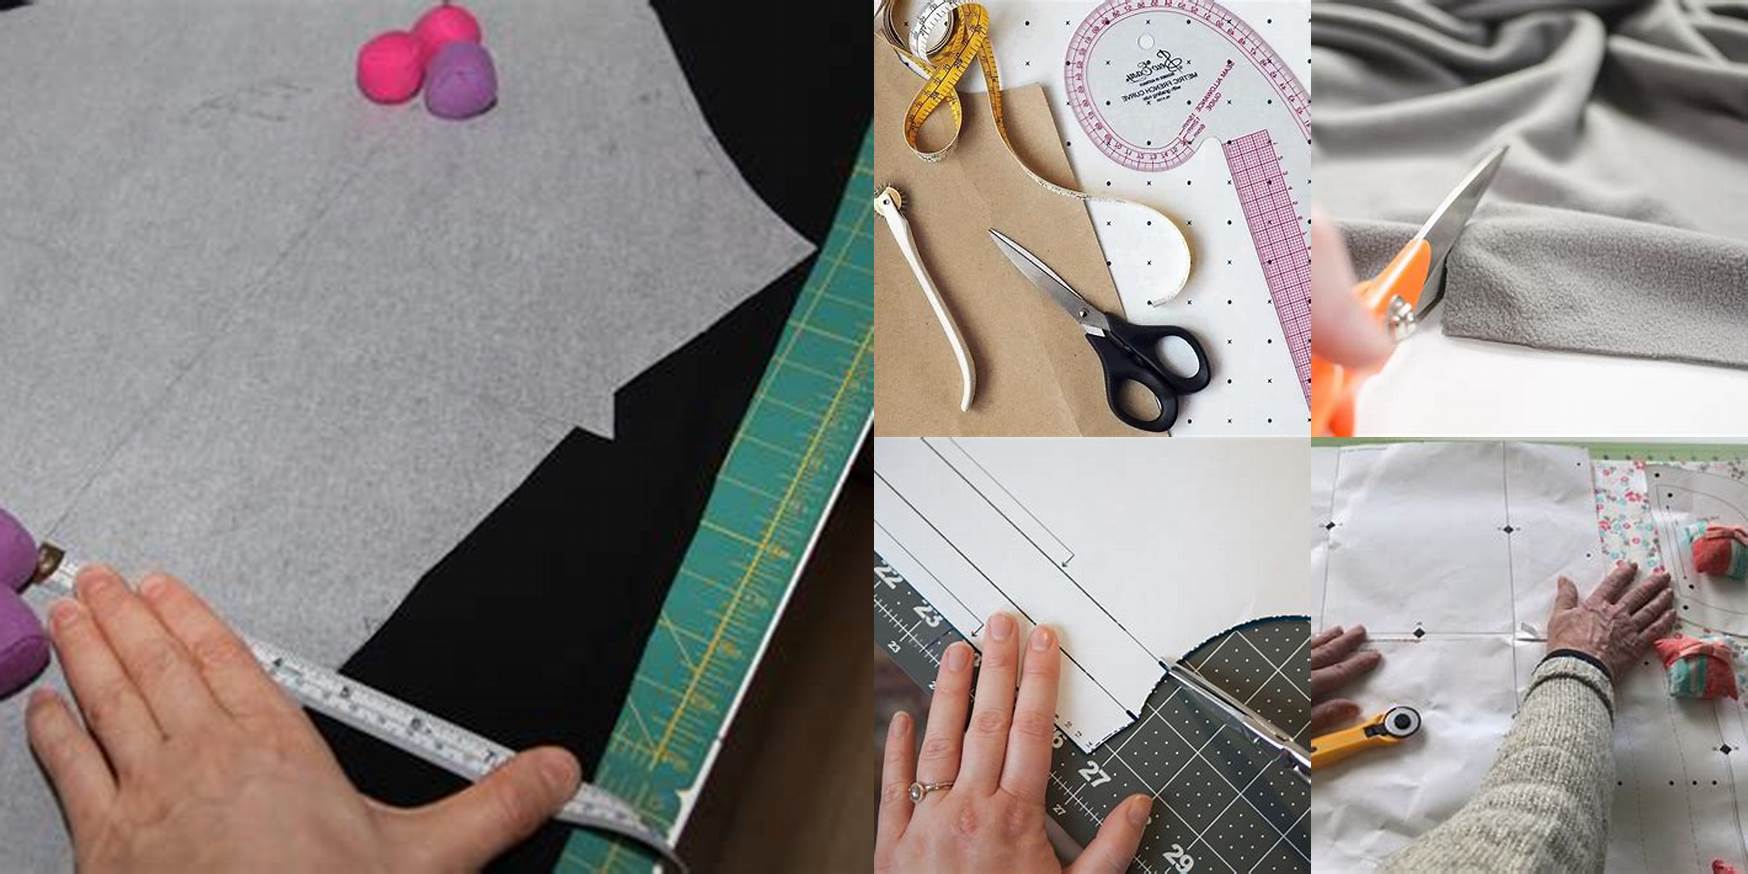 How To Cut Fabric From A Pattern